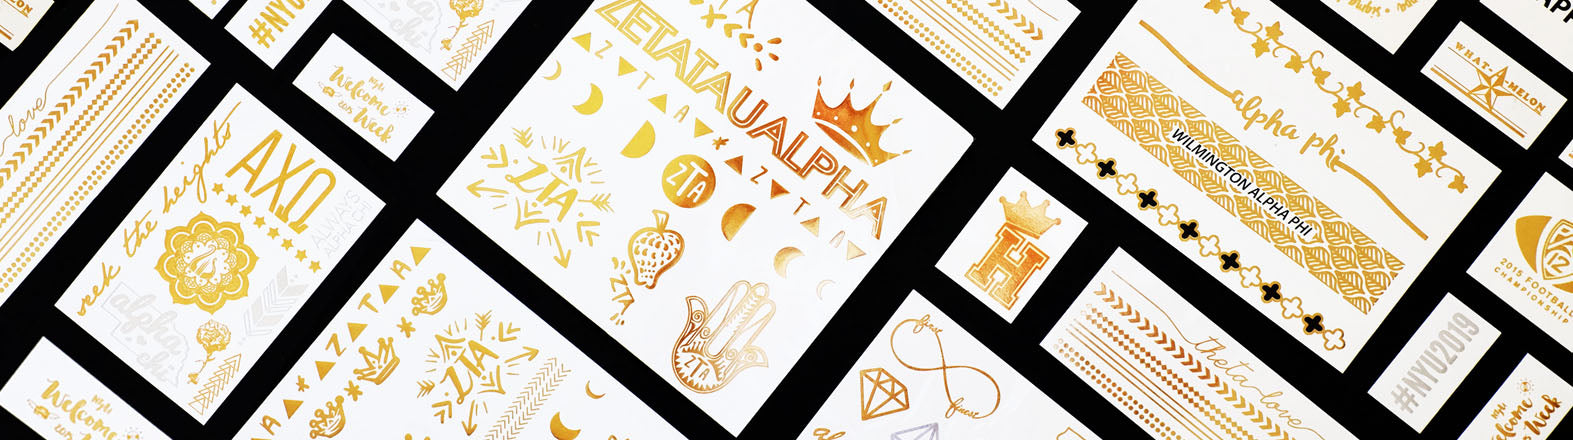 example of custom flash tattoos for sorority events